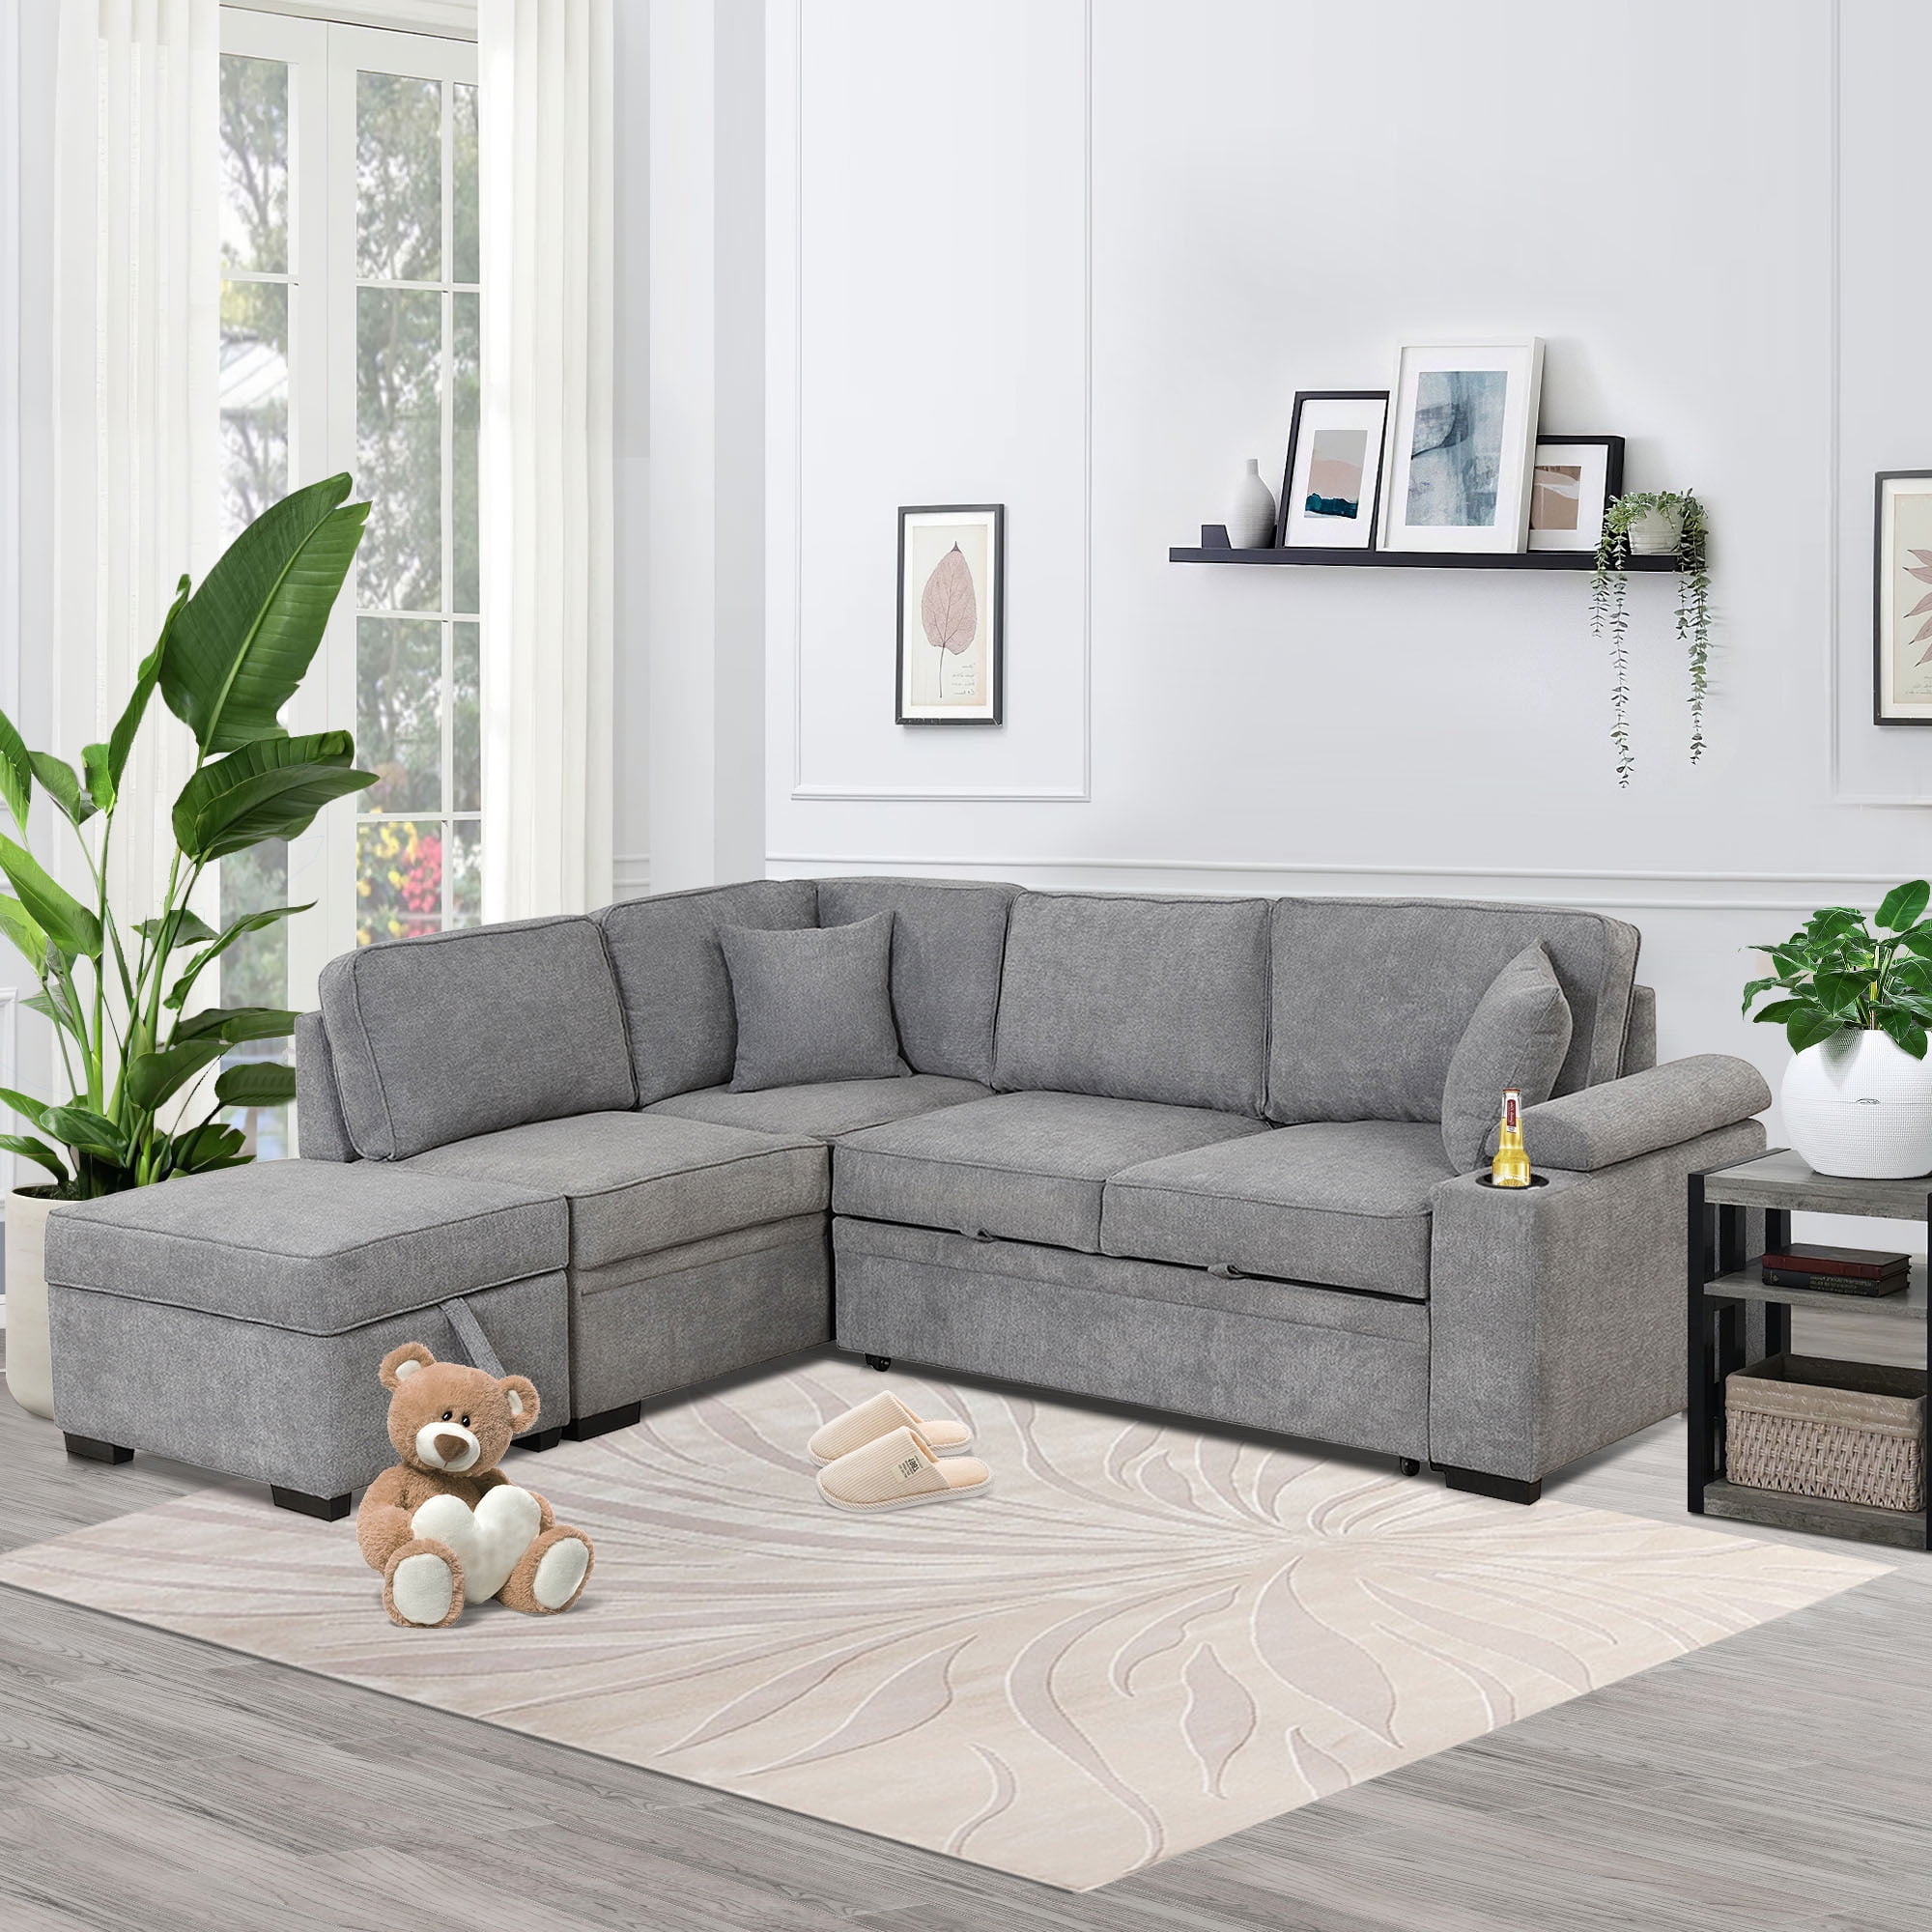 Euroco Sleeper Sofa Bed 5 Seat, Pull Out Sofa Bed with USB Ports L ...